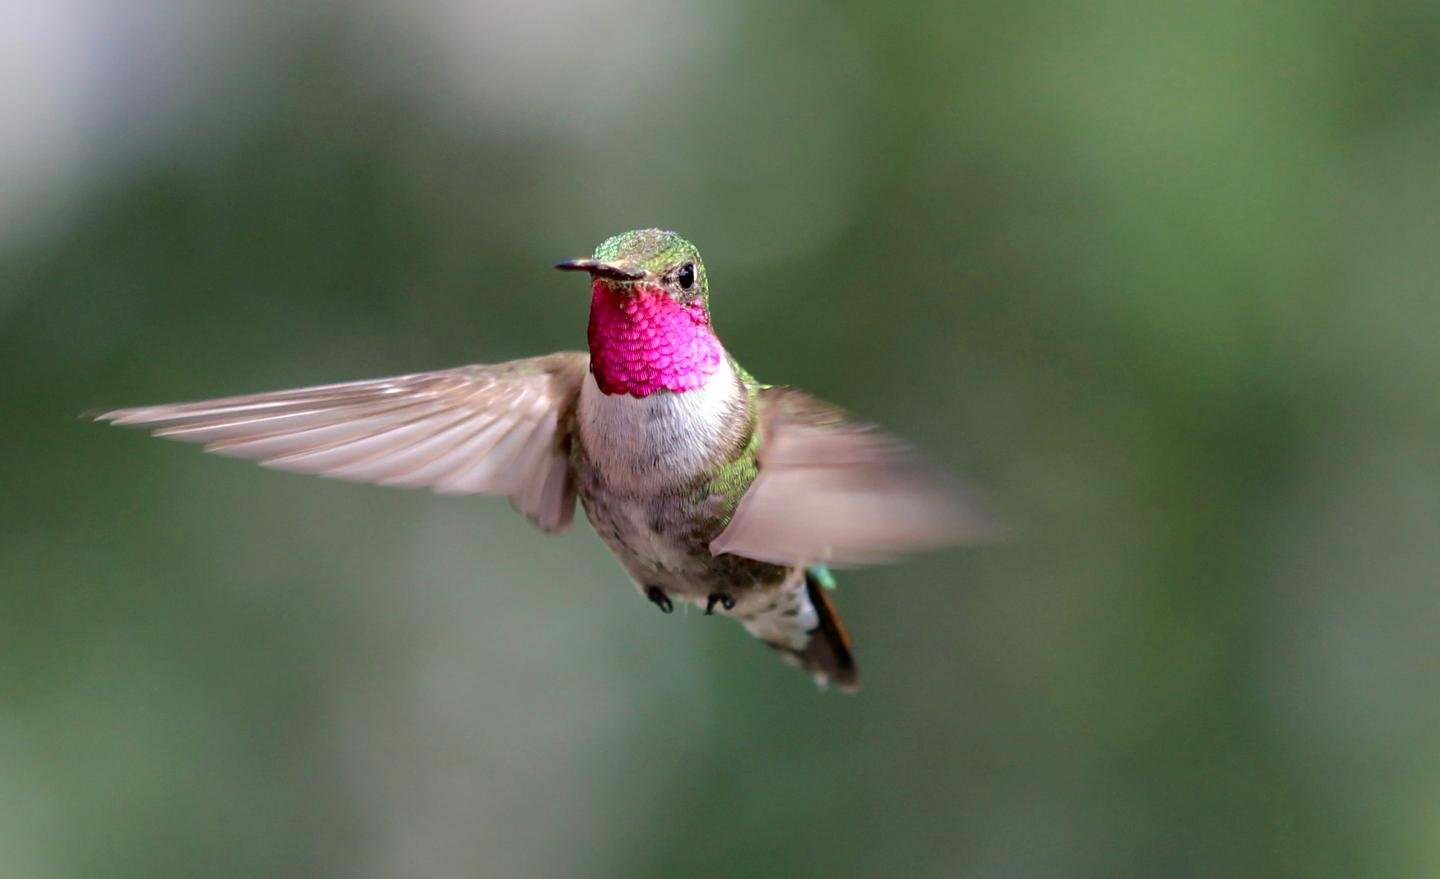 Hummingbirds can see colors we can’t even imagine